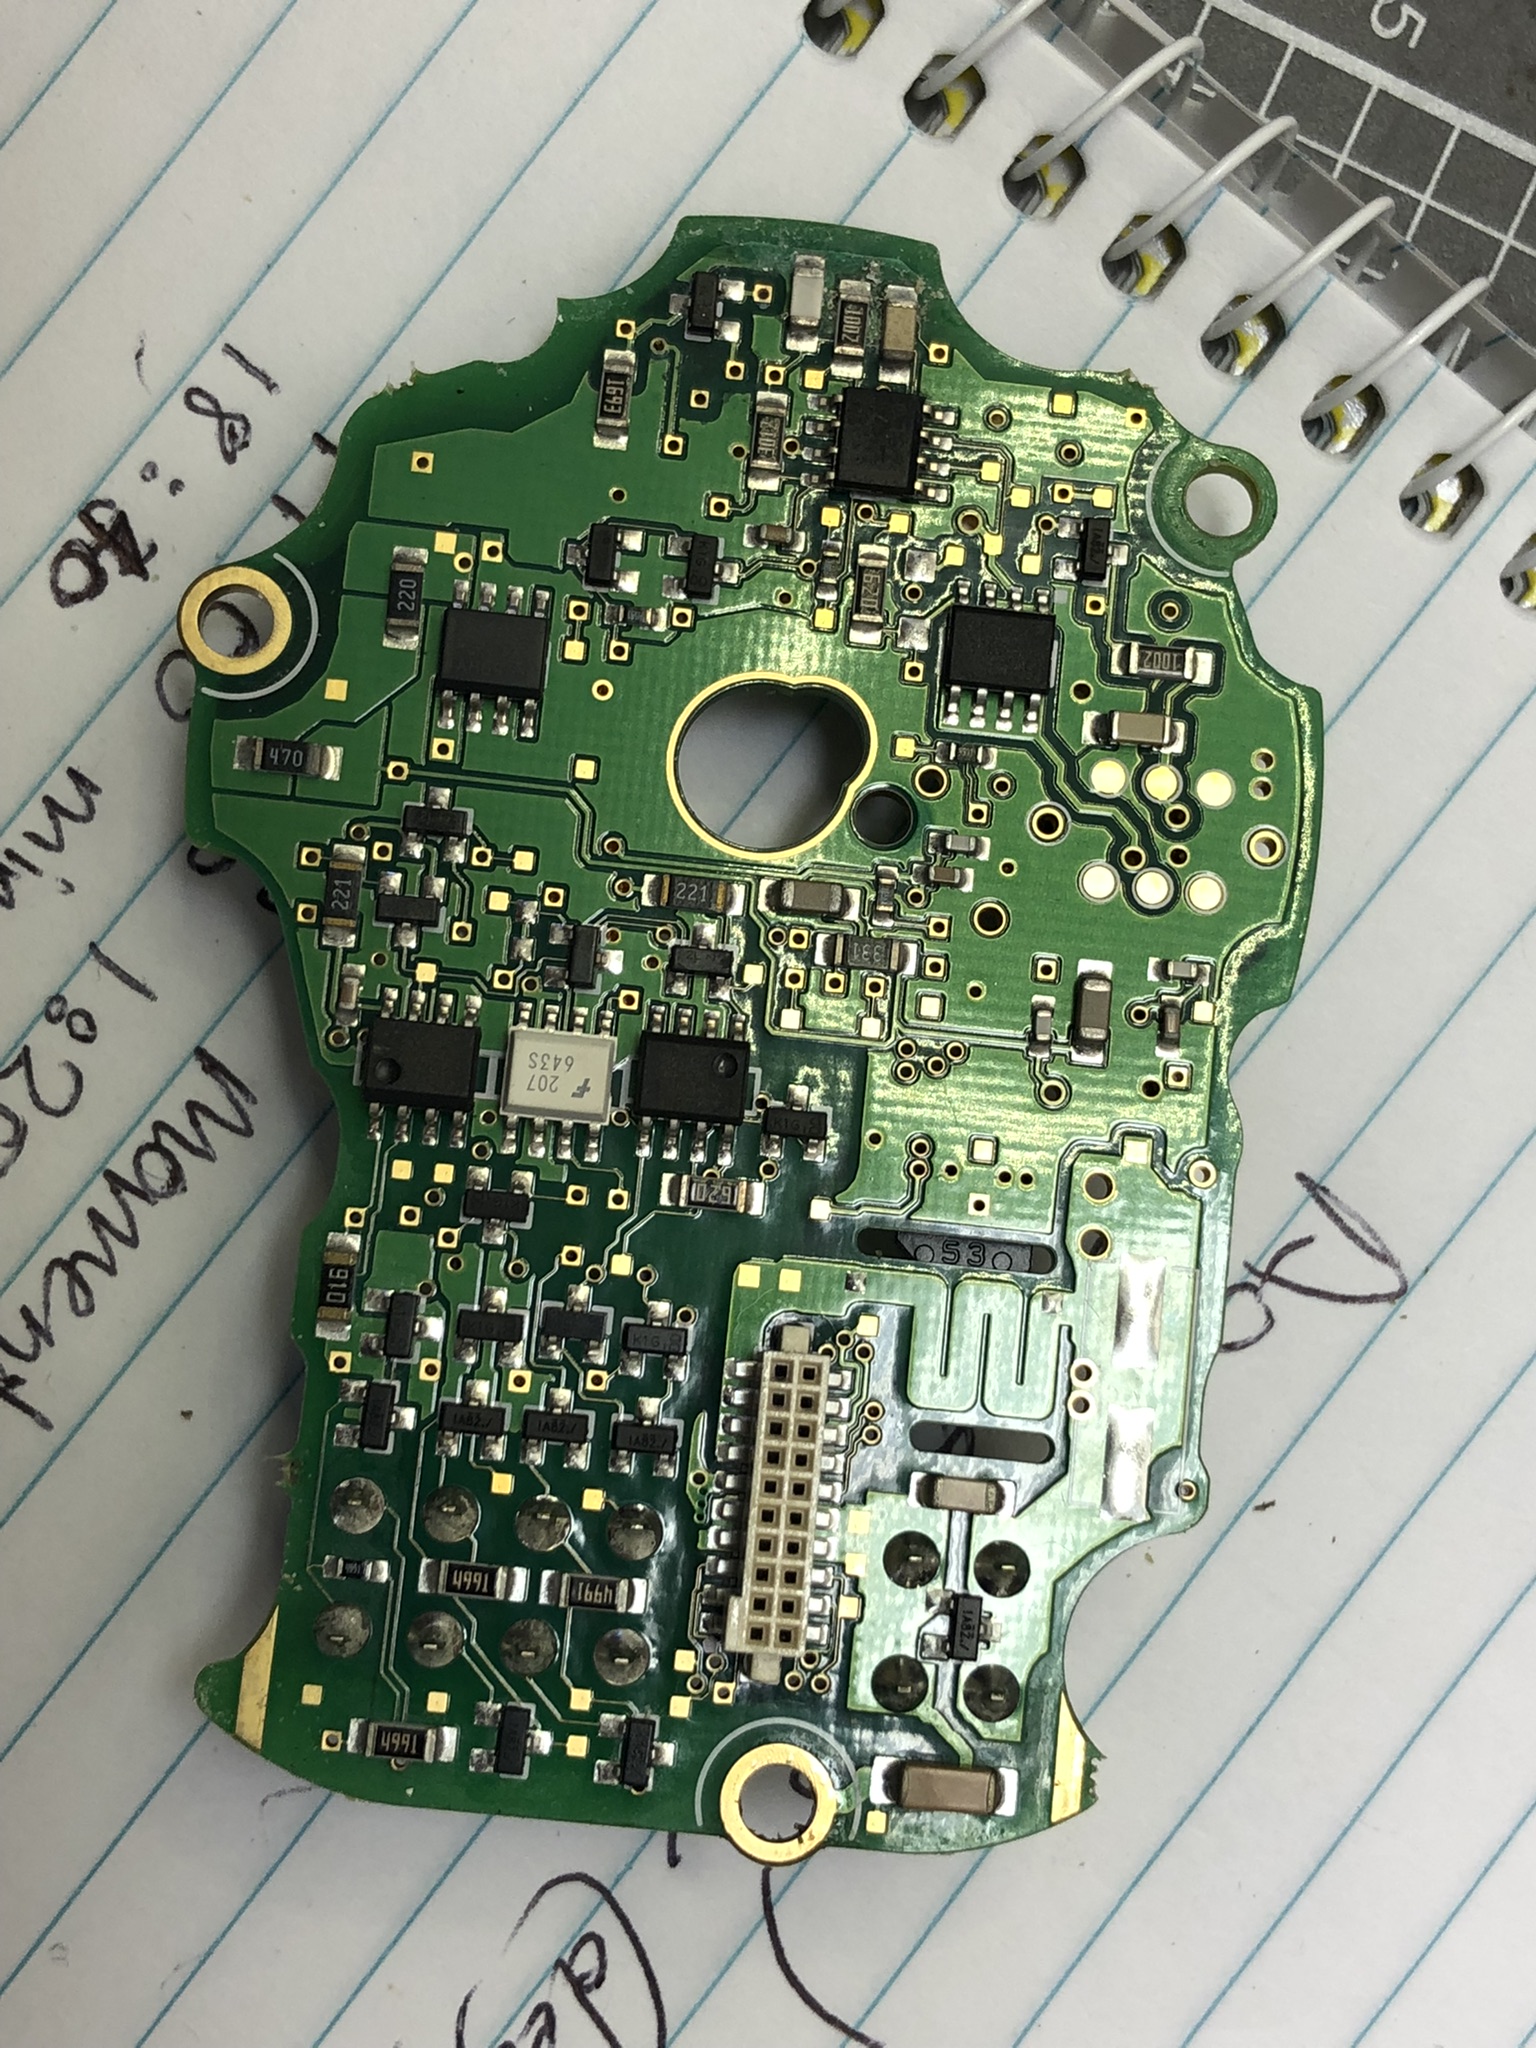 Back face of encoder PCB with optocouplers, various SMD passives and some discrete regulation components